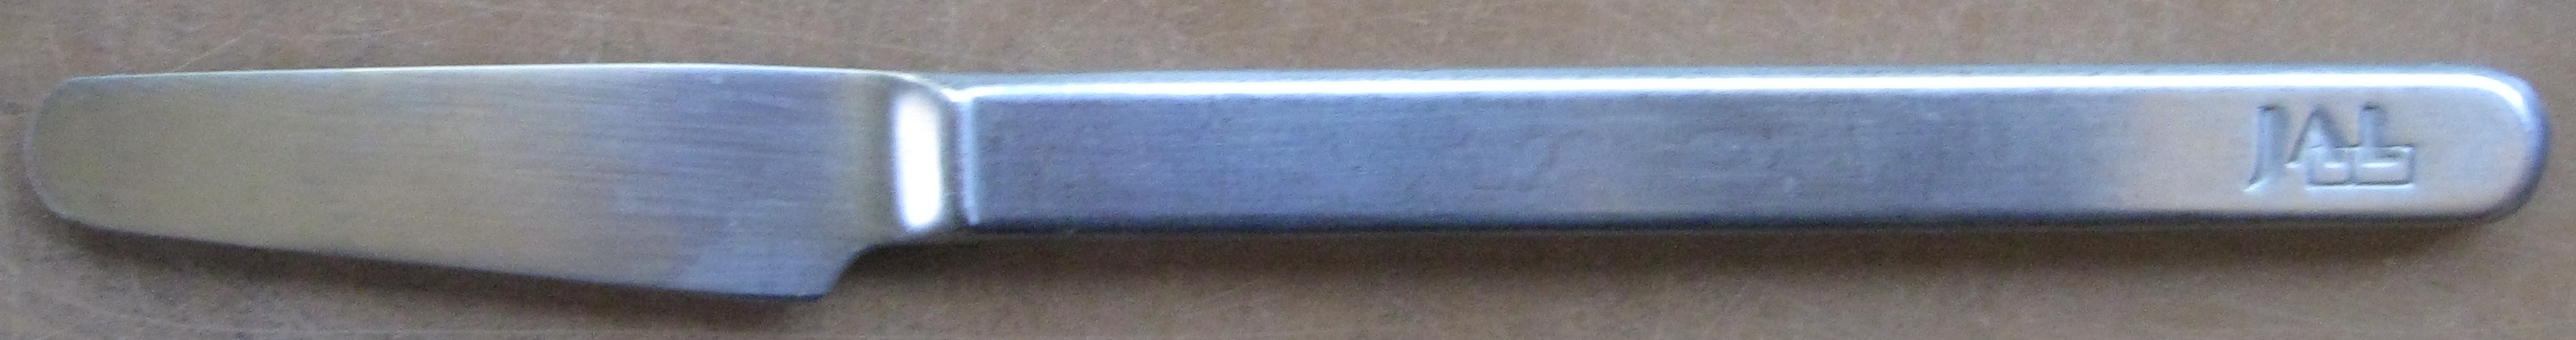 Japan Air Lines stainless knife